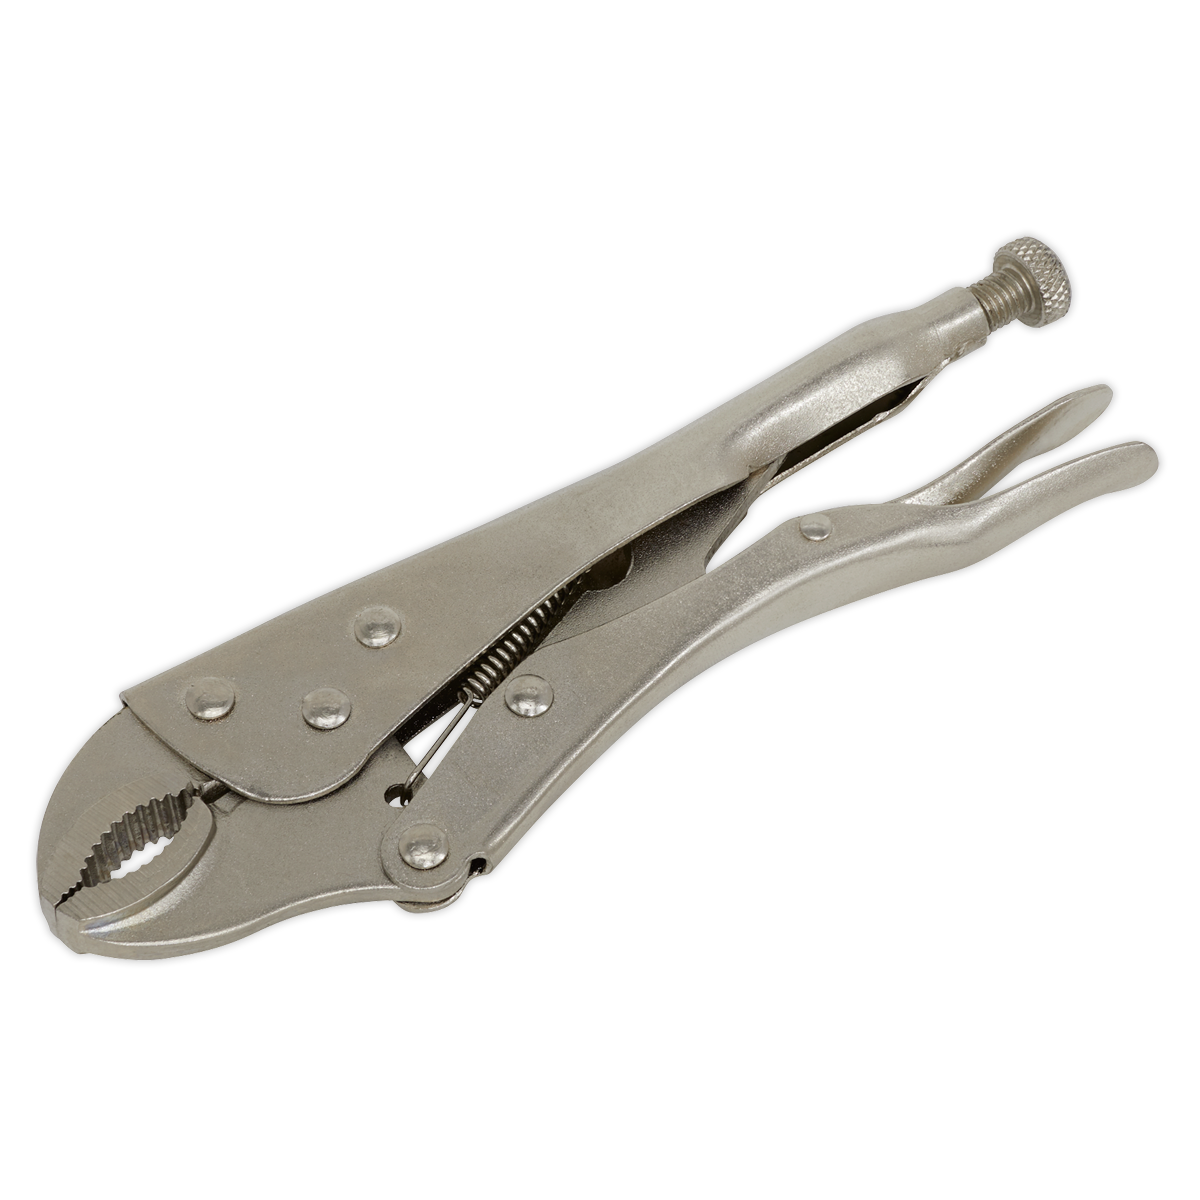 Locking Pliers 215mm Curved Jaw - S0487 - Farming Parts